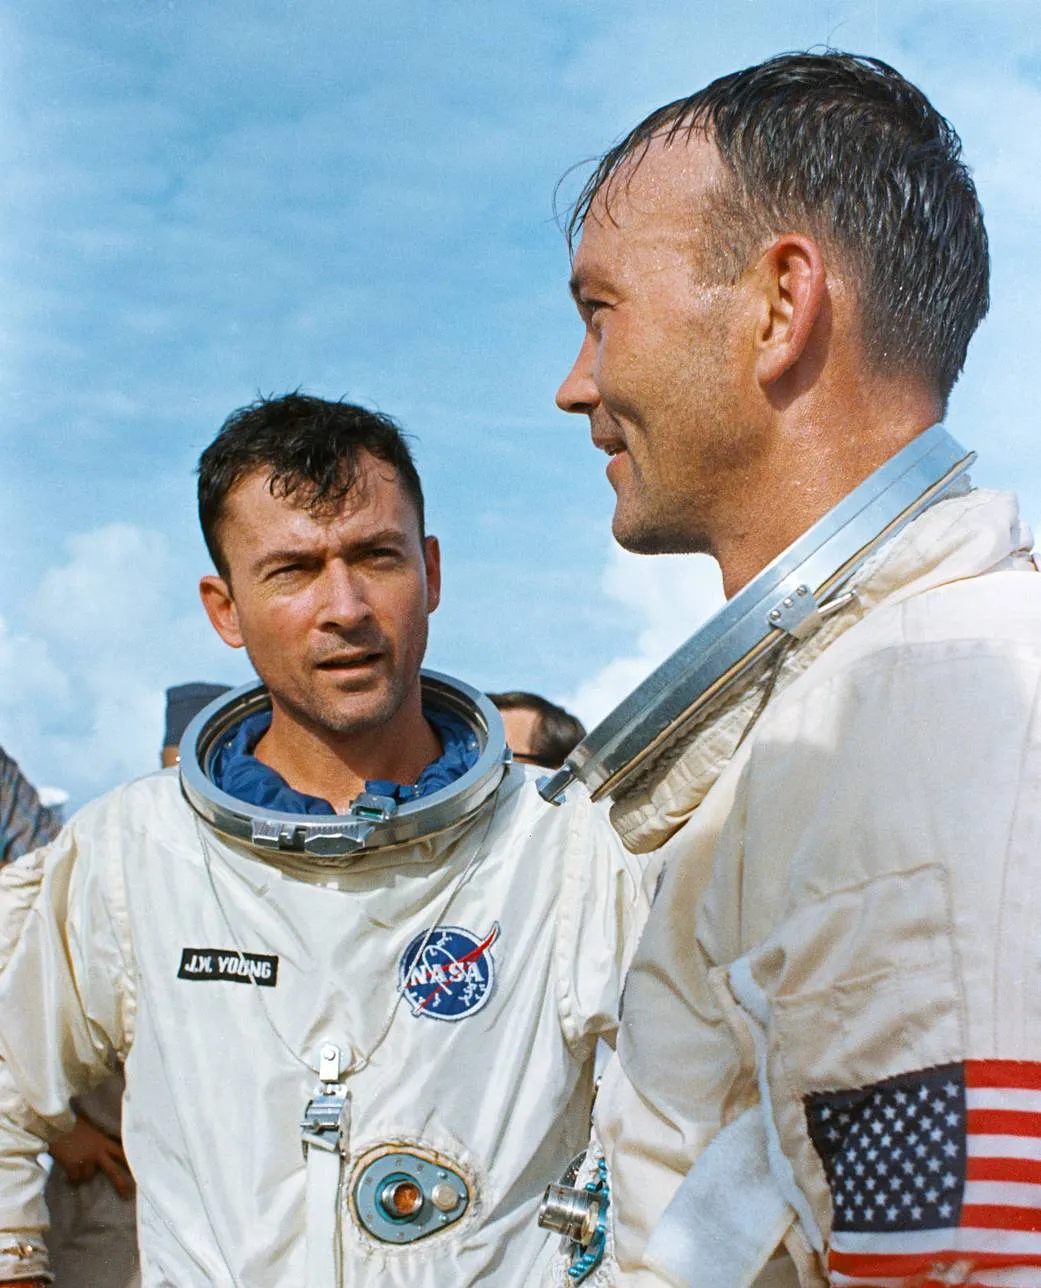 Gemini 10 crew John Young and Michael Collins pictured aboard the ship USS Guadalcanal on 21 July 1966, following successful splashdown of the Gemini 10 mission. Credit: NASA